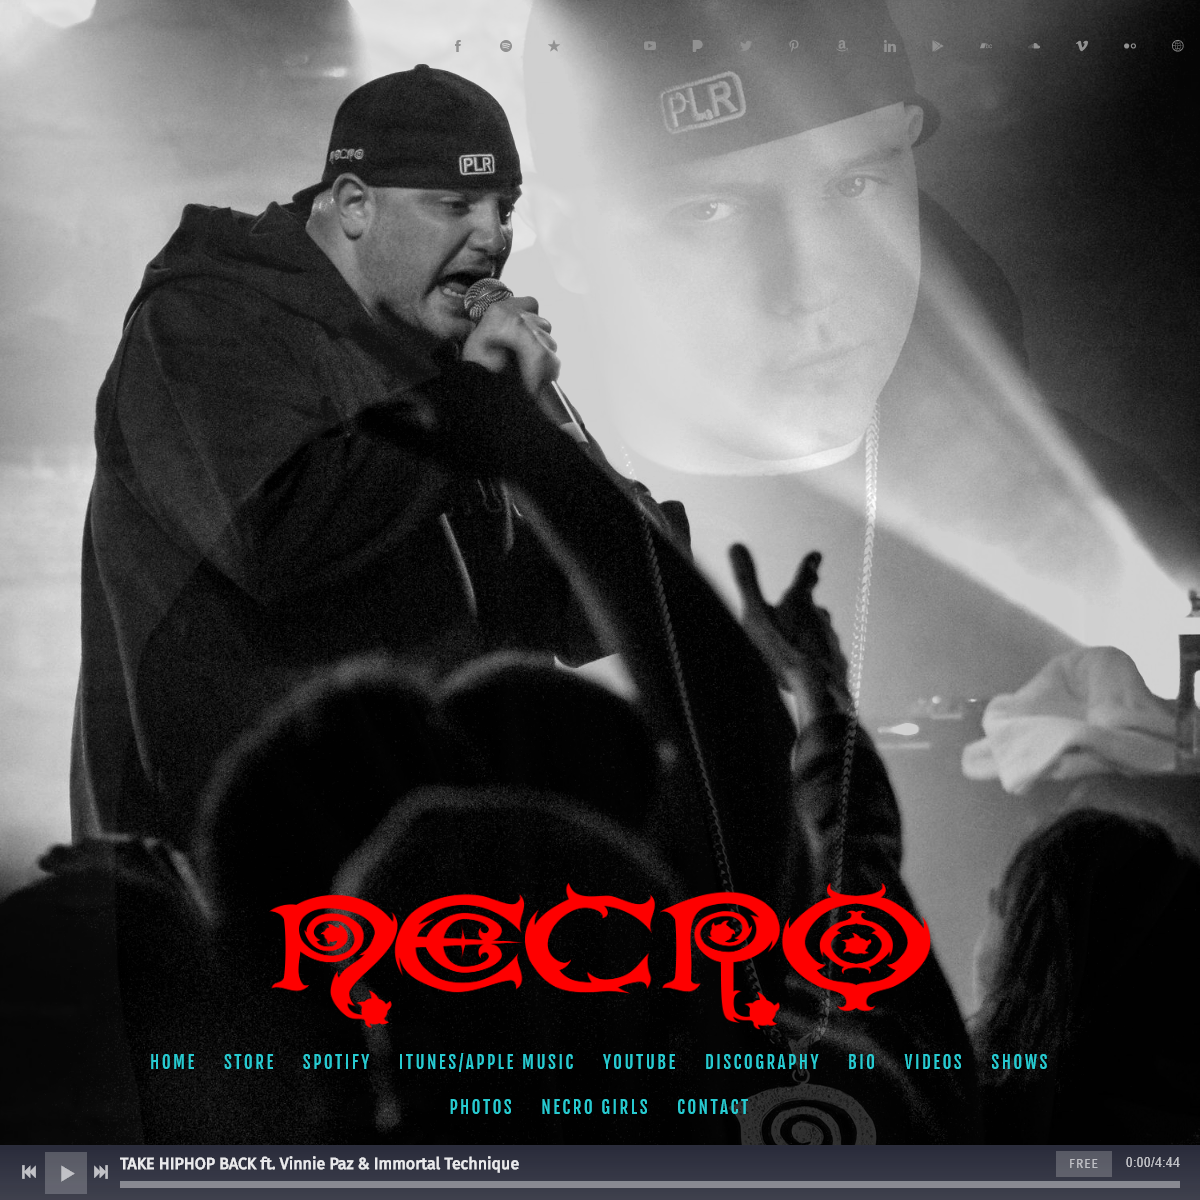 A complete backup of necrohiphop.com